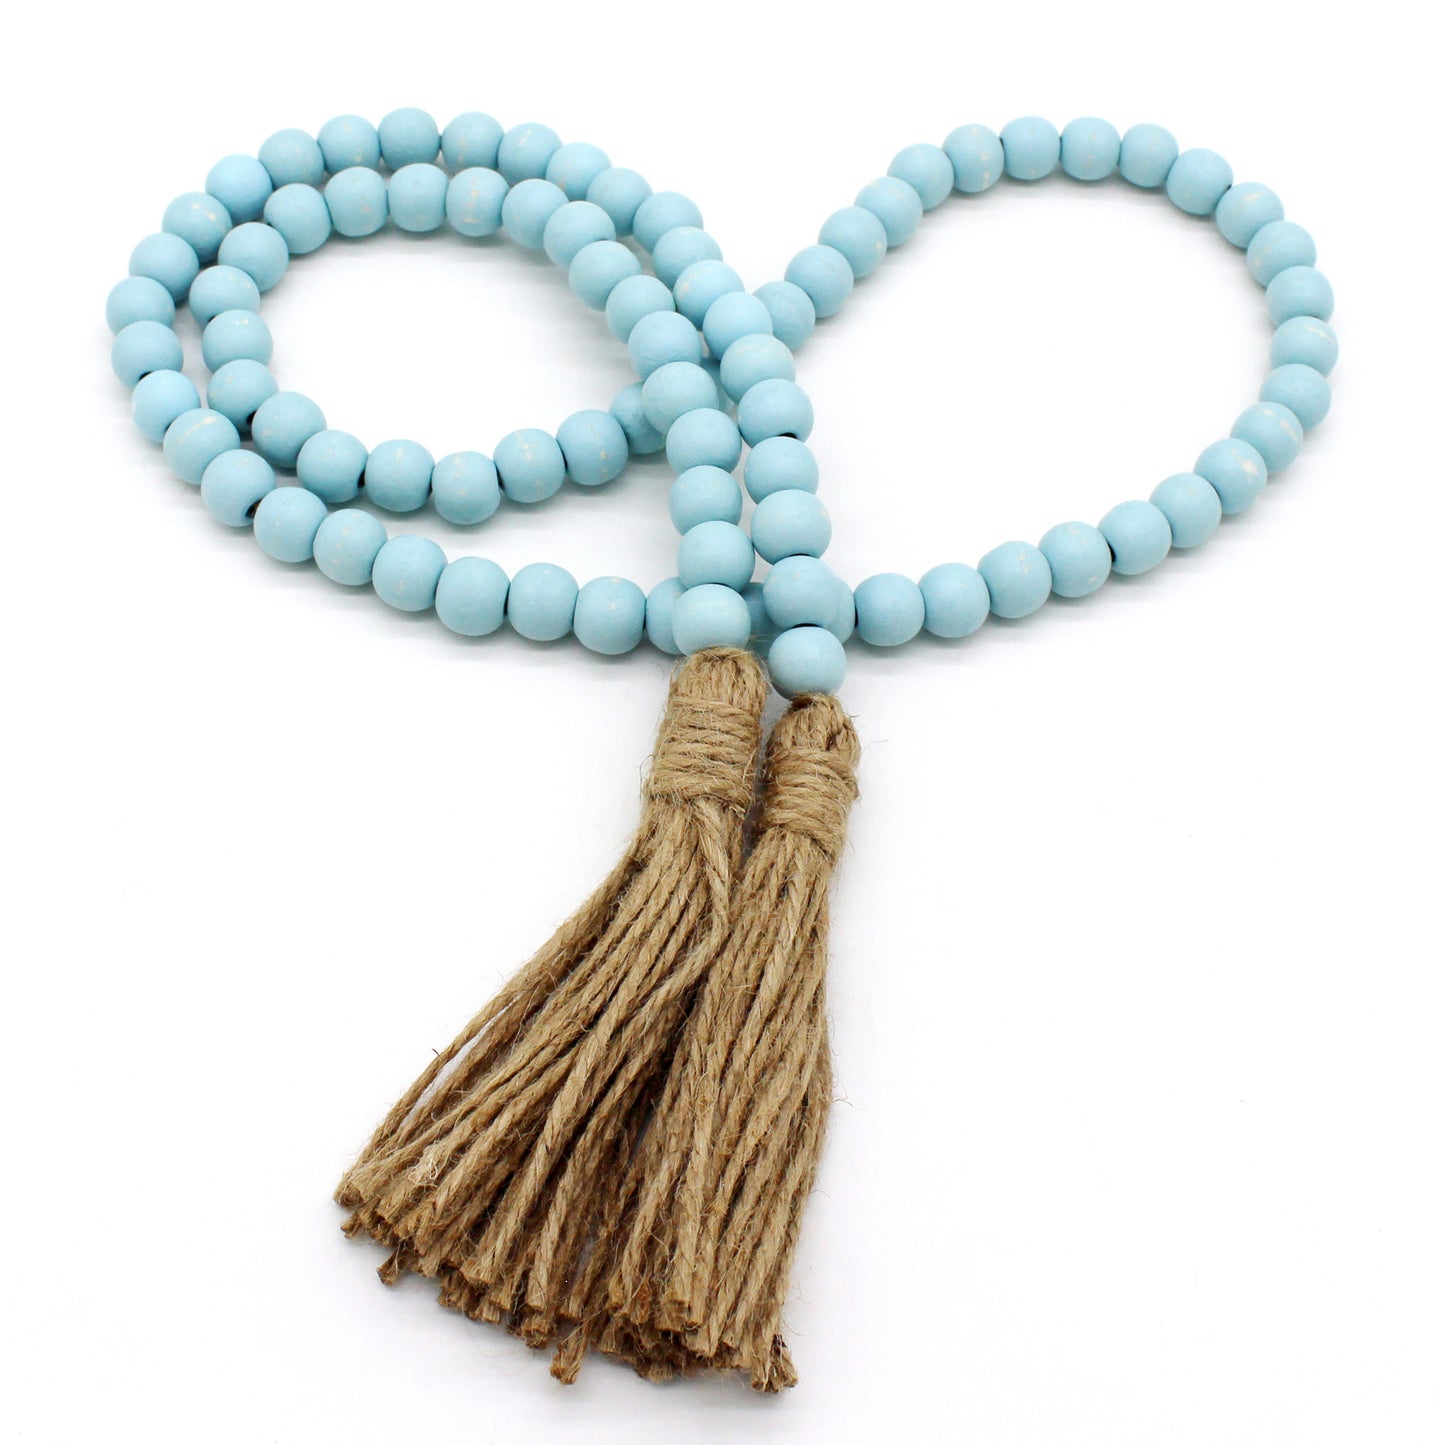 CVHOMEDECO. Wood Beads Garland with Tassels Farmhouse Rustic Wooden Prayer Bead String Wall Hanging Accent for Home Festival Decor. Teal Distressed